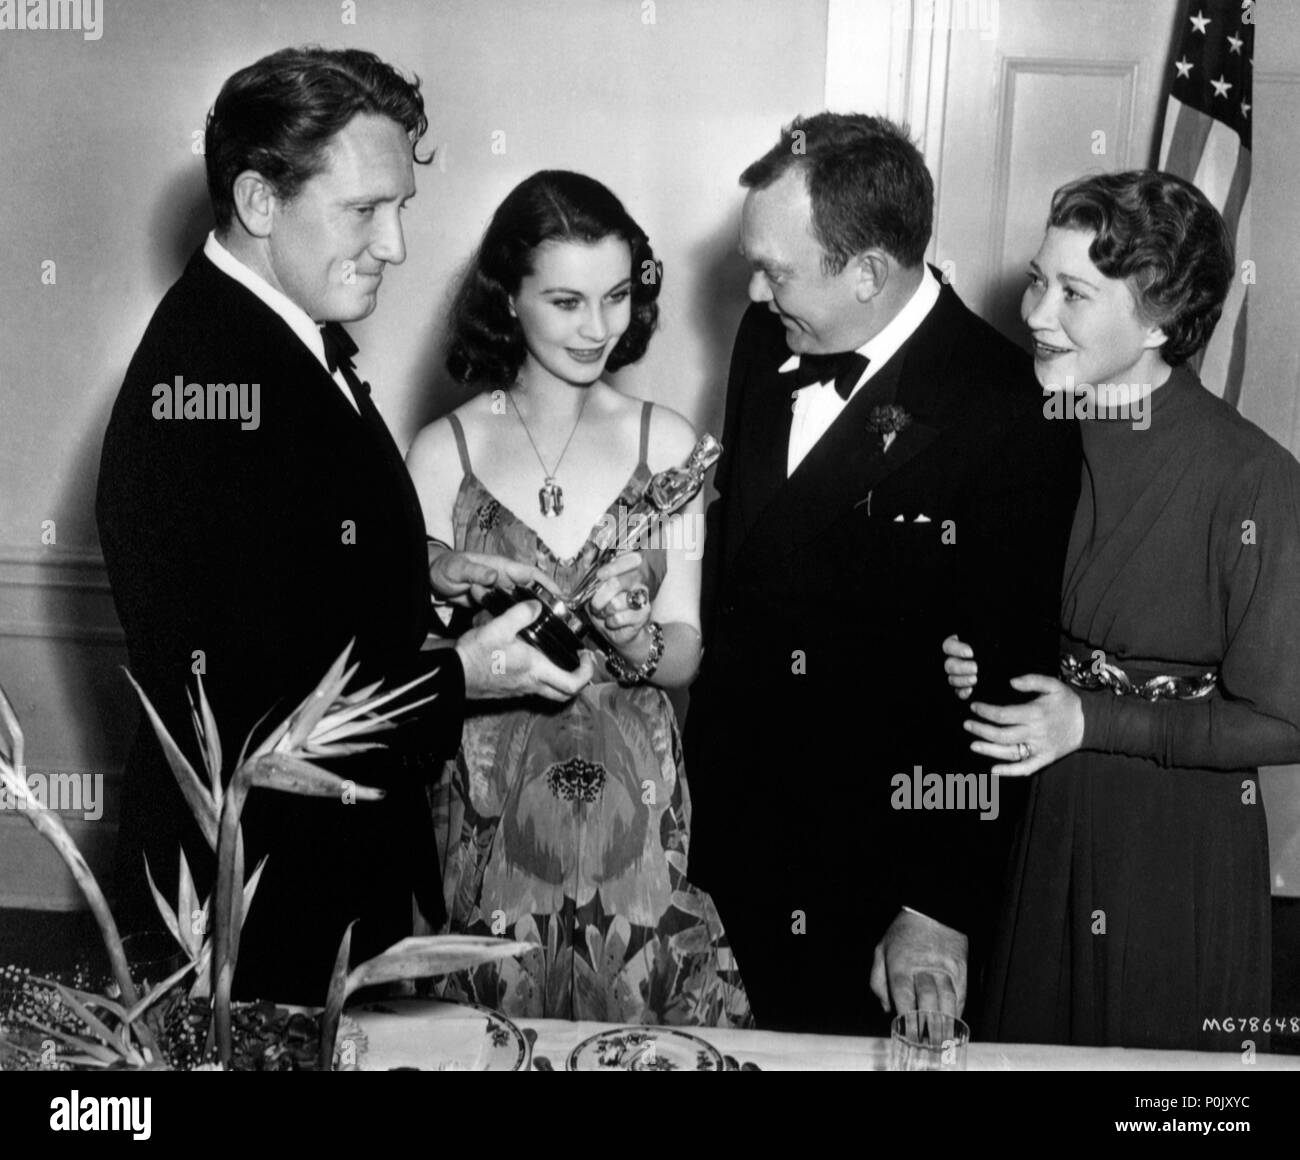 Description: 12th Academy Awards (1940). Vivien Leigh, best actress for 'Gone With the Wind'. Spencer Tracy, Thomas Mitchell and Fay Bainter accompany her..  Year: 1940.  Stars: FAY BAINTER; VIVIEN LEIGH; THOMAS MITCHELL; SPENCER TRACY. Stock Photo